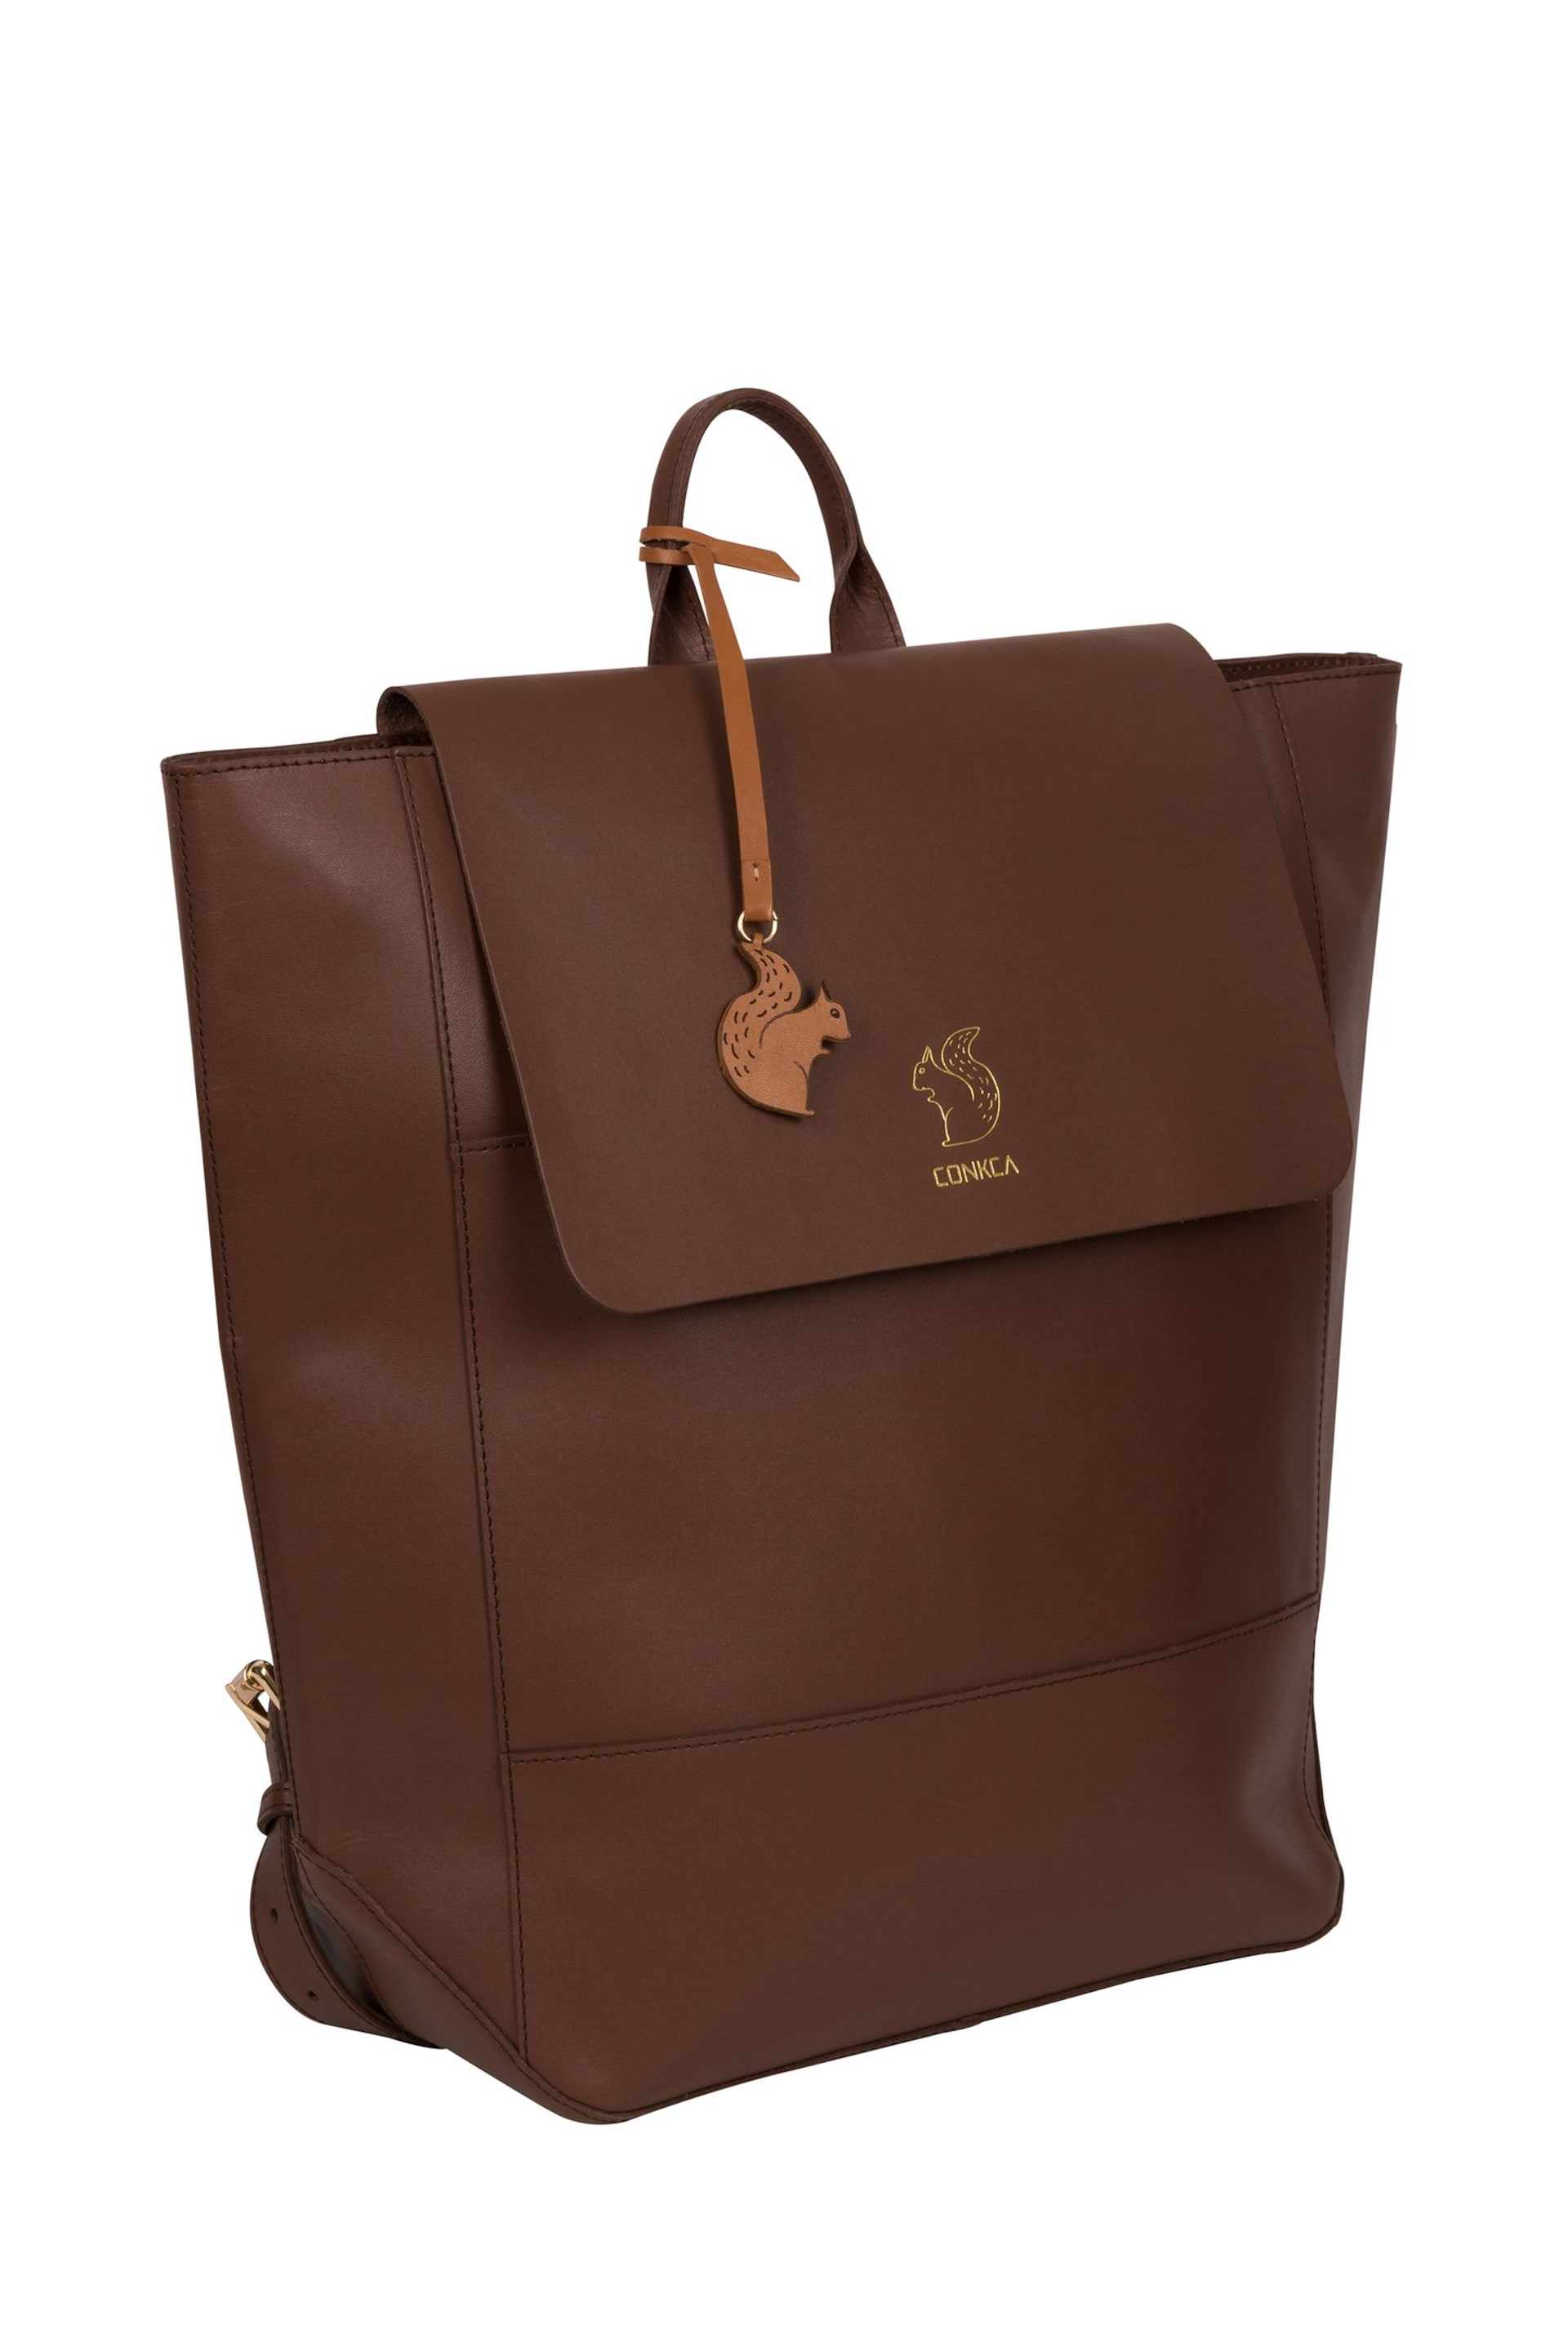 Conkca Butler Vegetable-Tanned Leather Backpack - Image 3 of 5